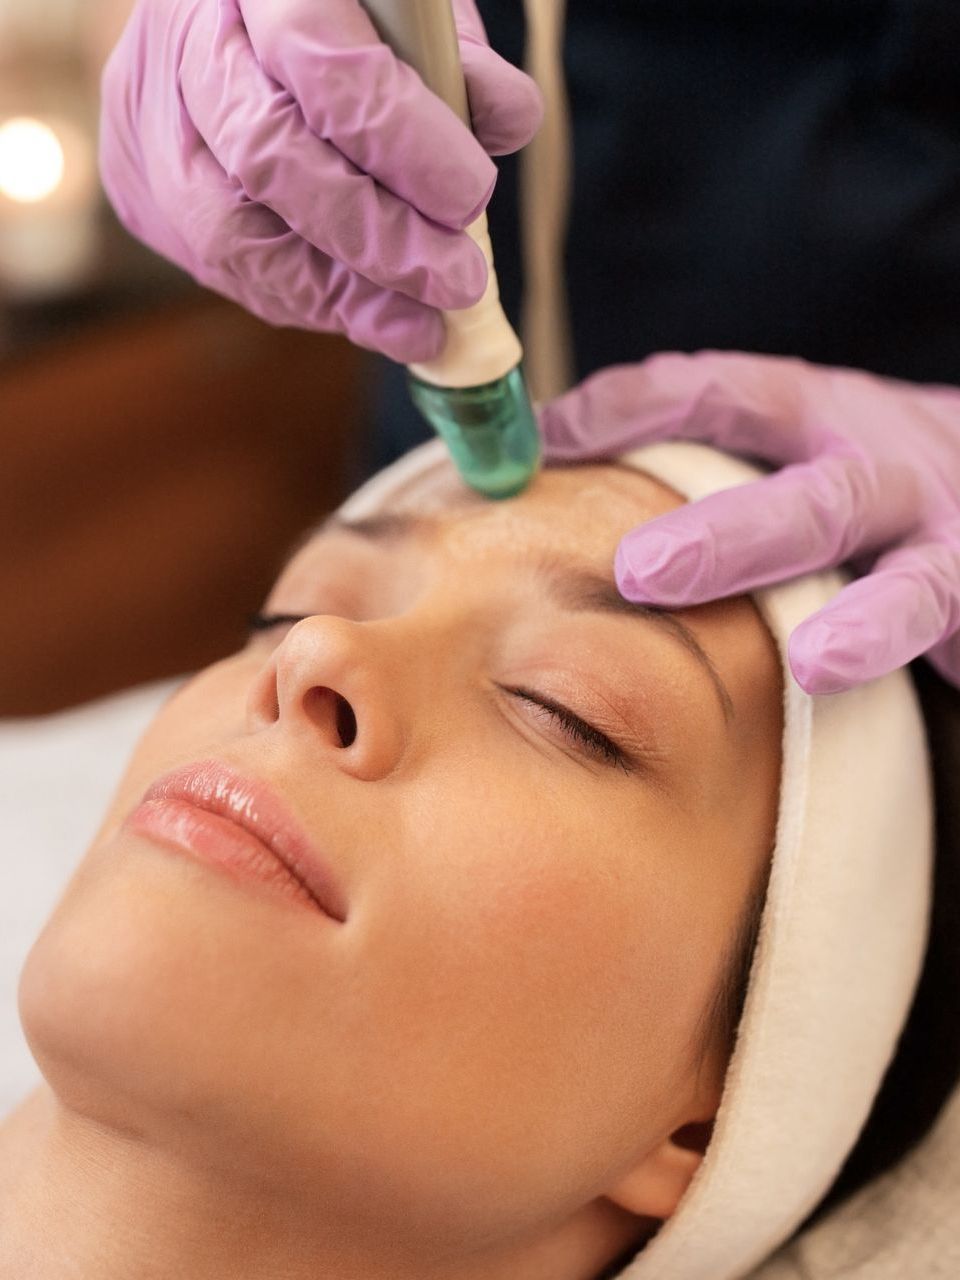 woman getting microdermabrasion done on face